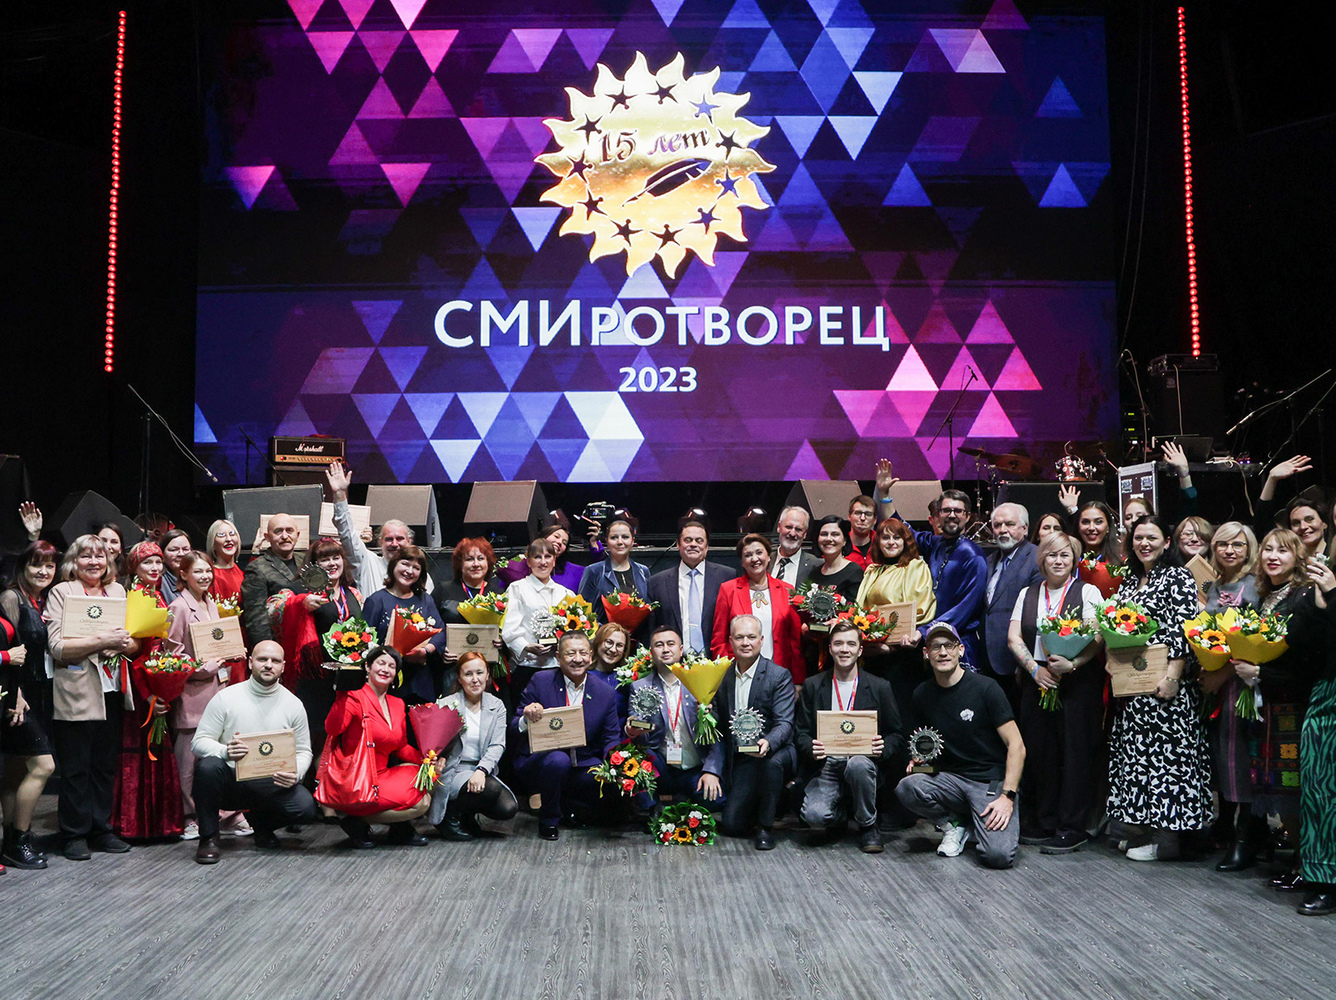 How did the anniversary award ceremony of the “Media Creator” competition go: footage from the event